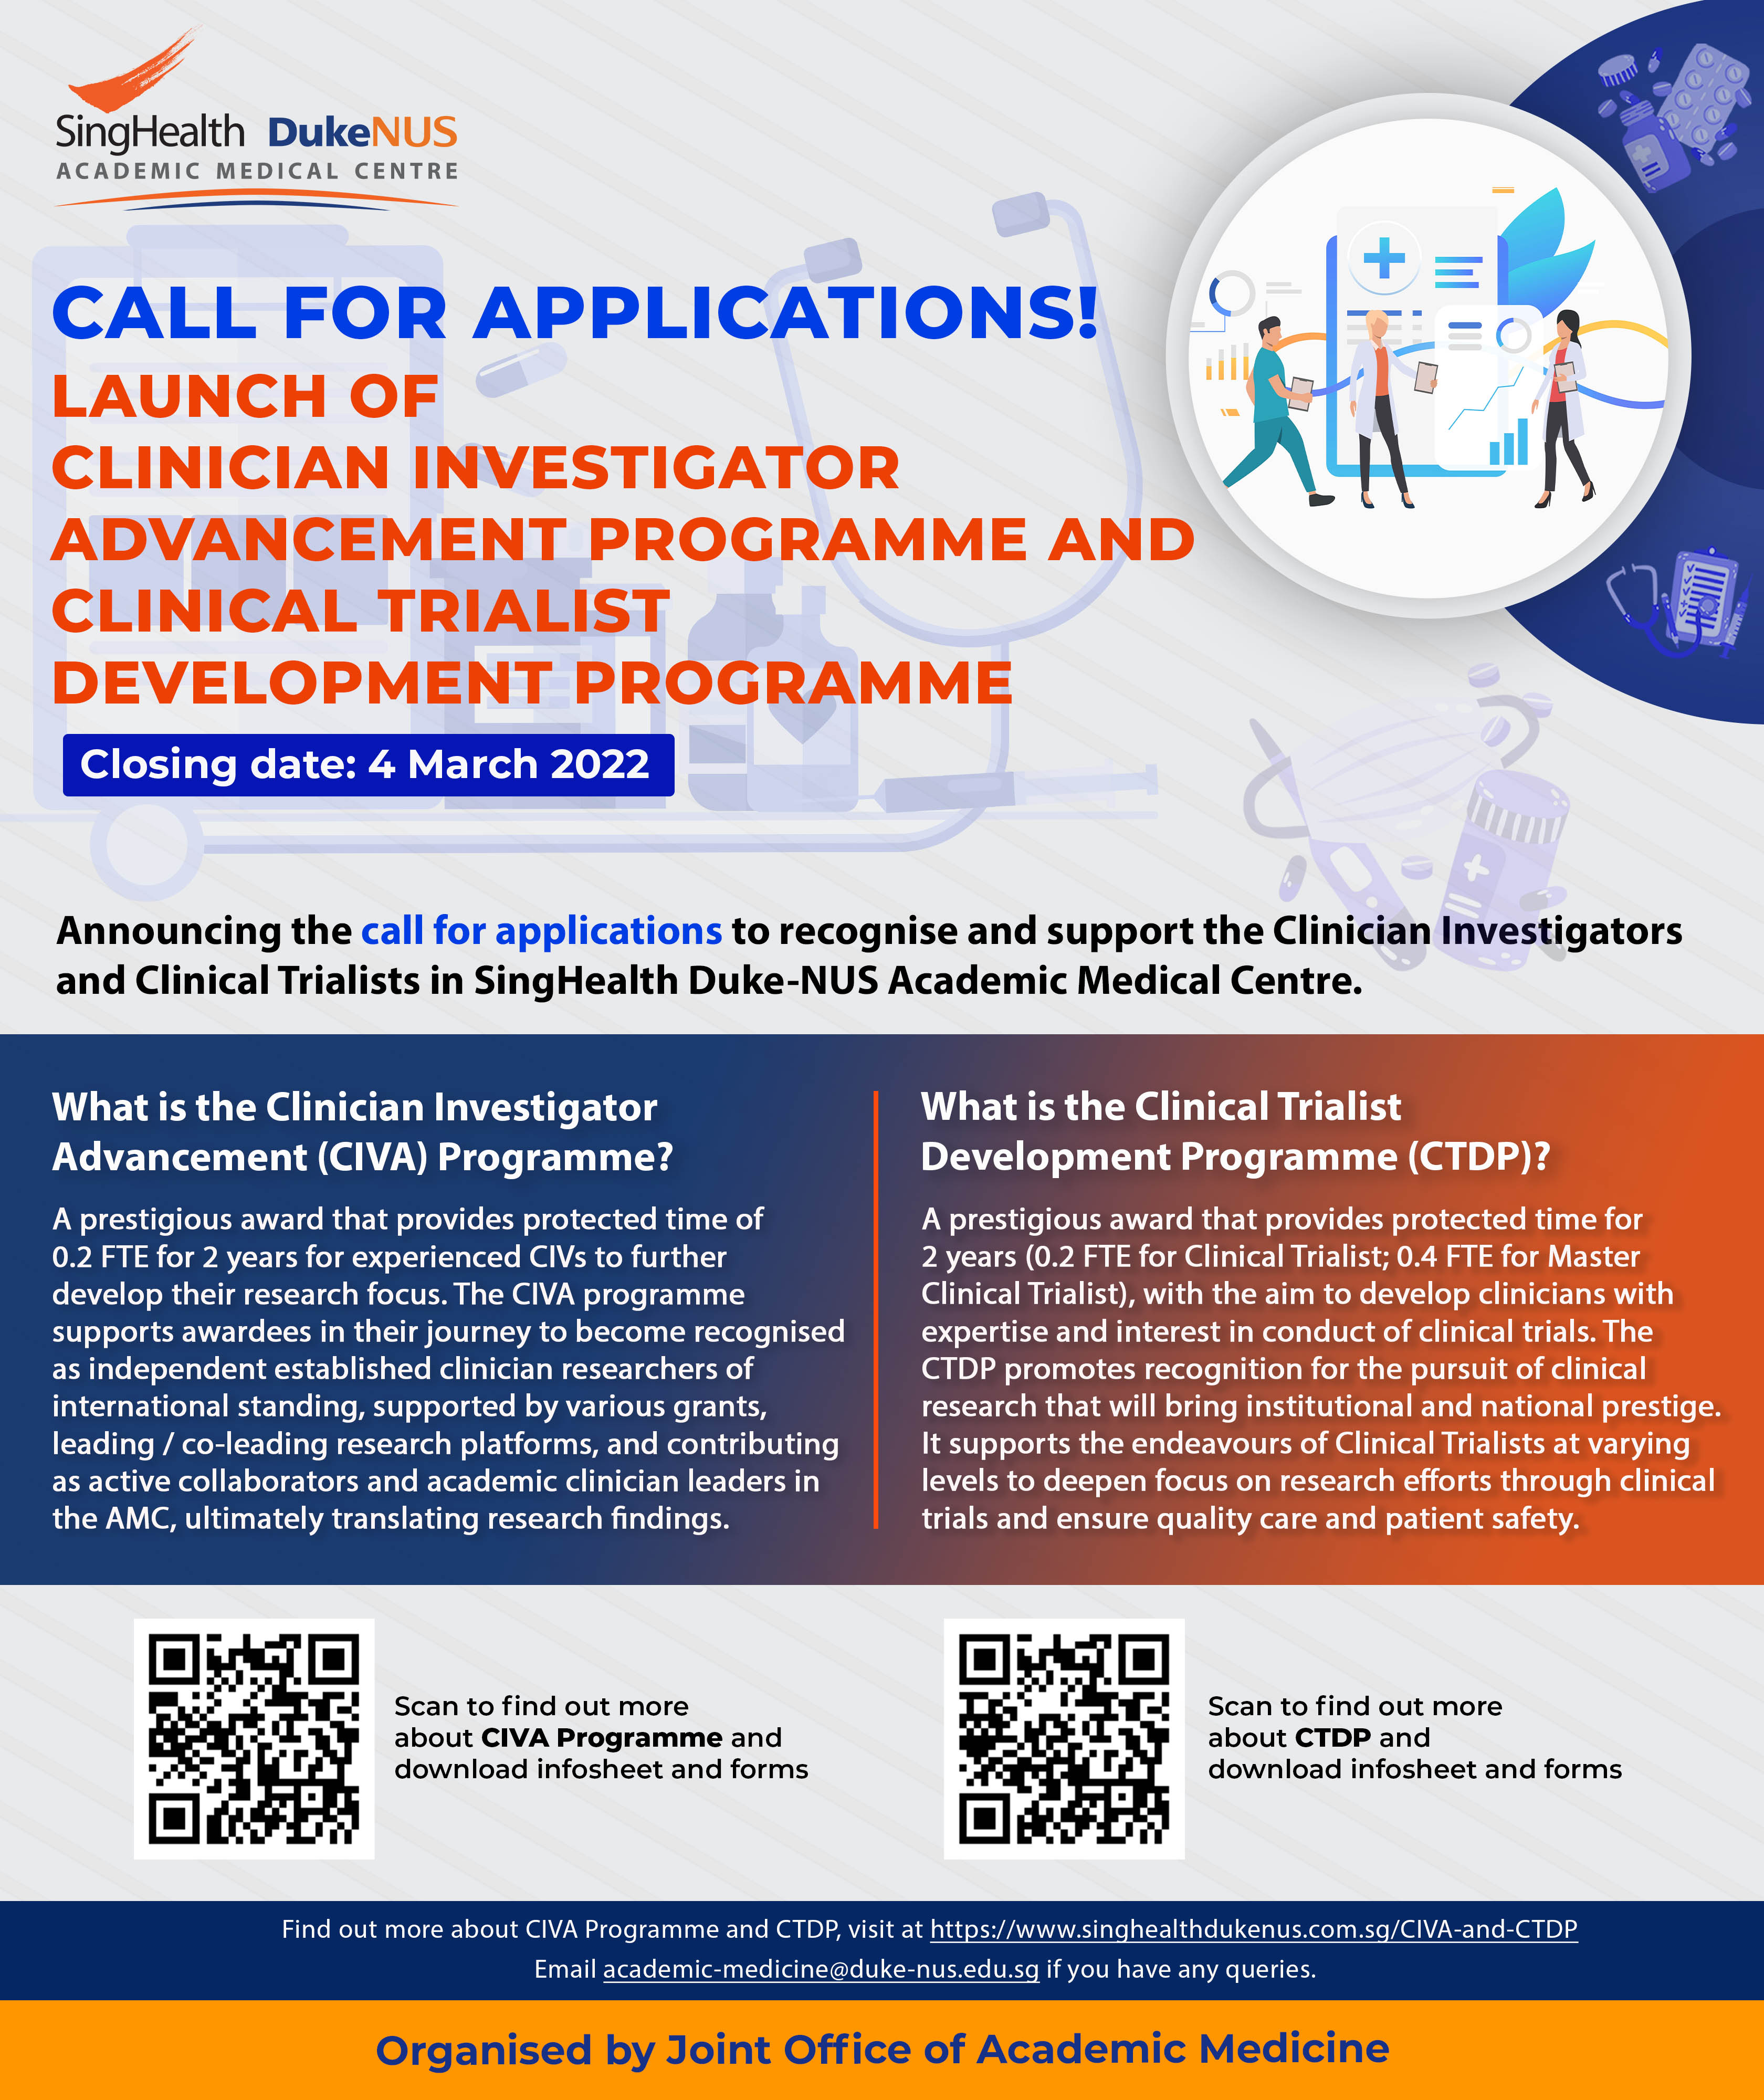 Call for Applications Poster - CIVA and CTDP (amended) v2.1.jpg